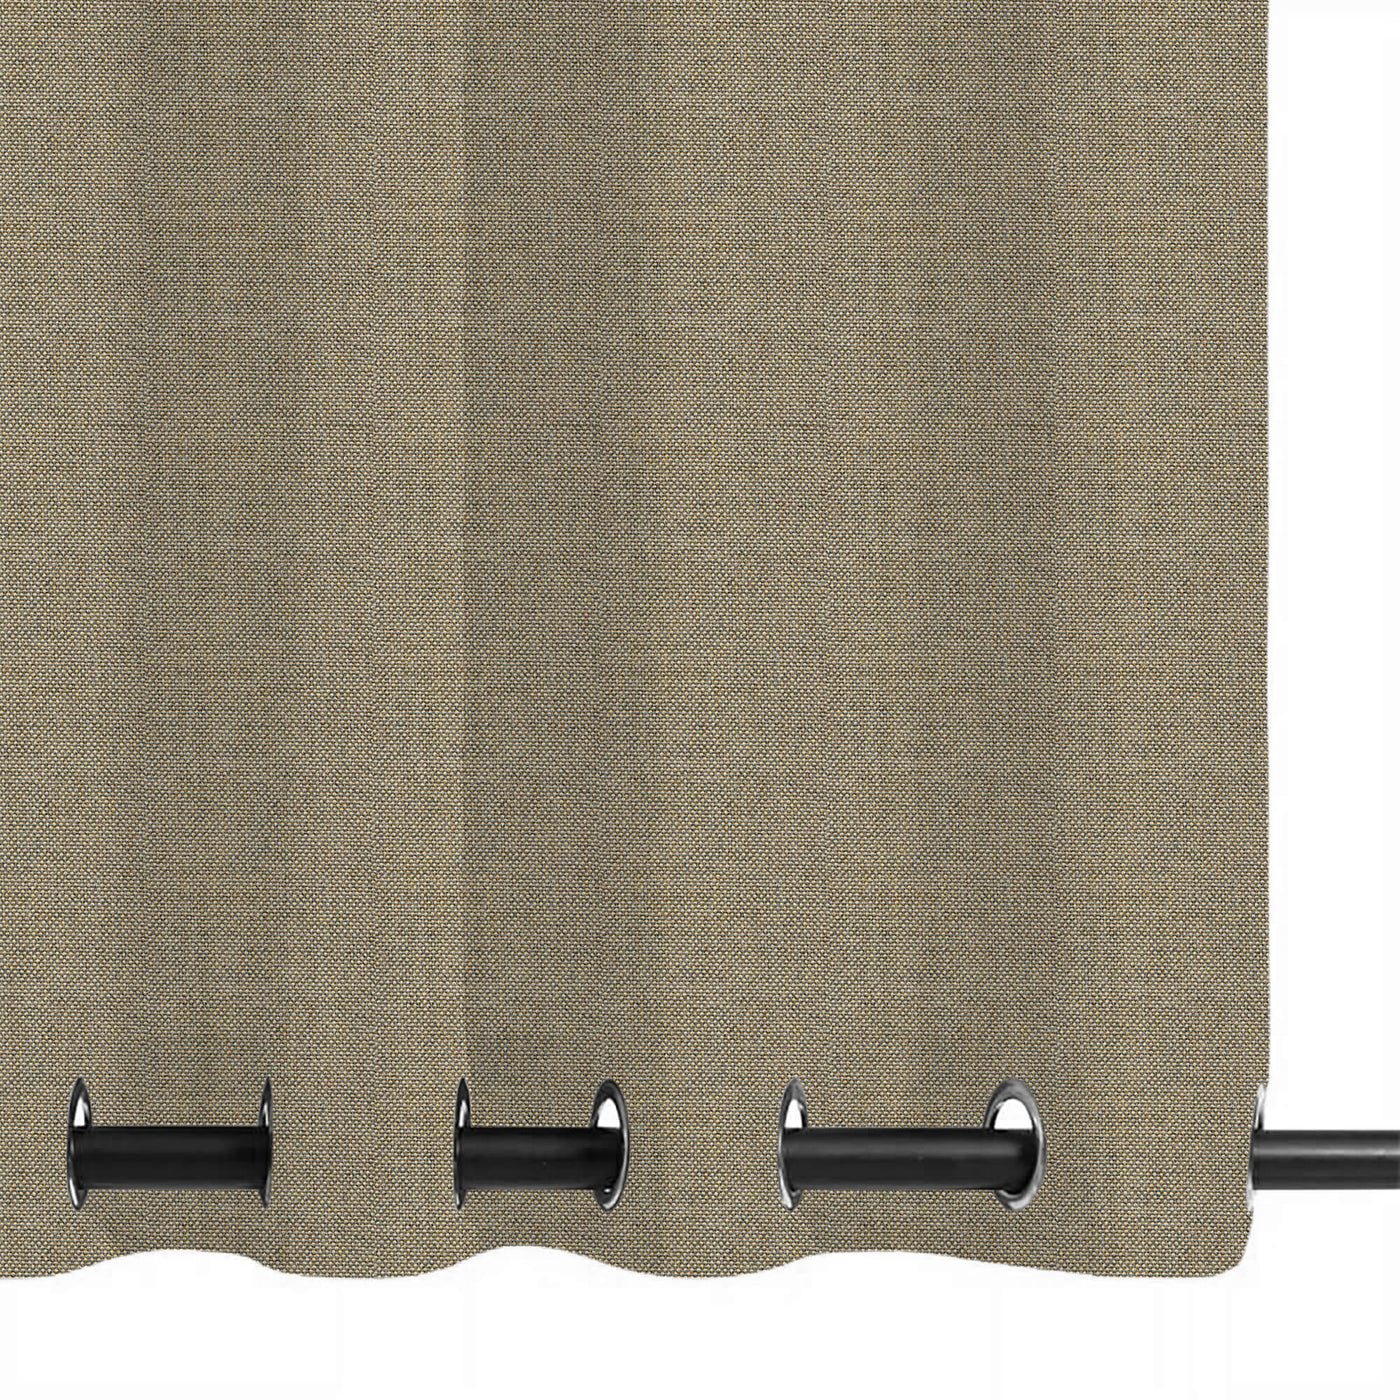 PENGI Outdoor Curtains Waterproof - Sailcloth Toasted Coconut